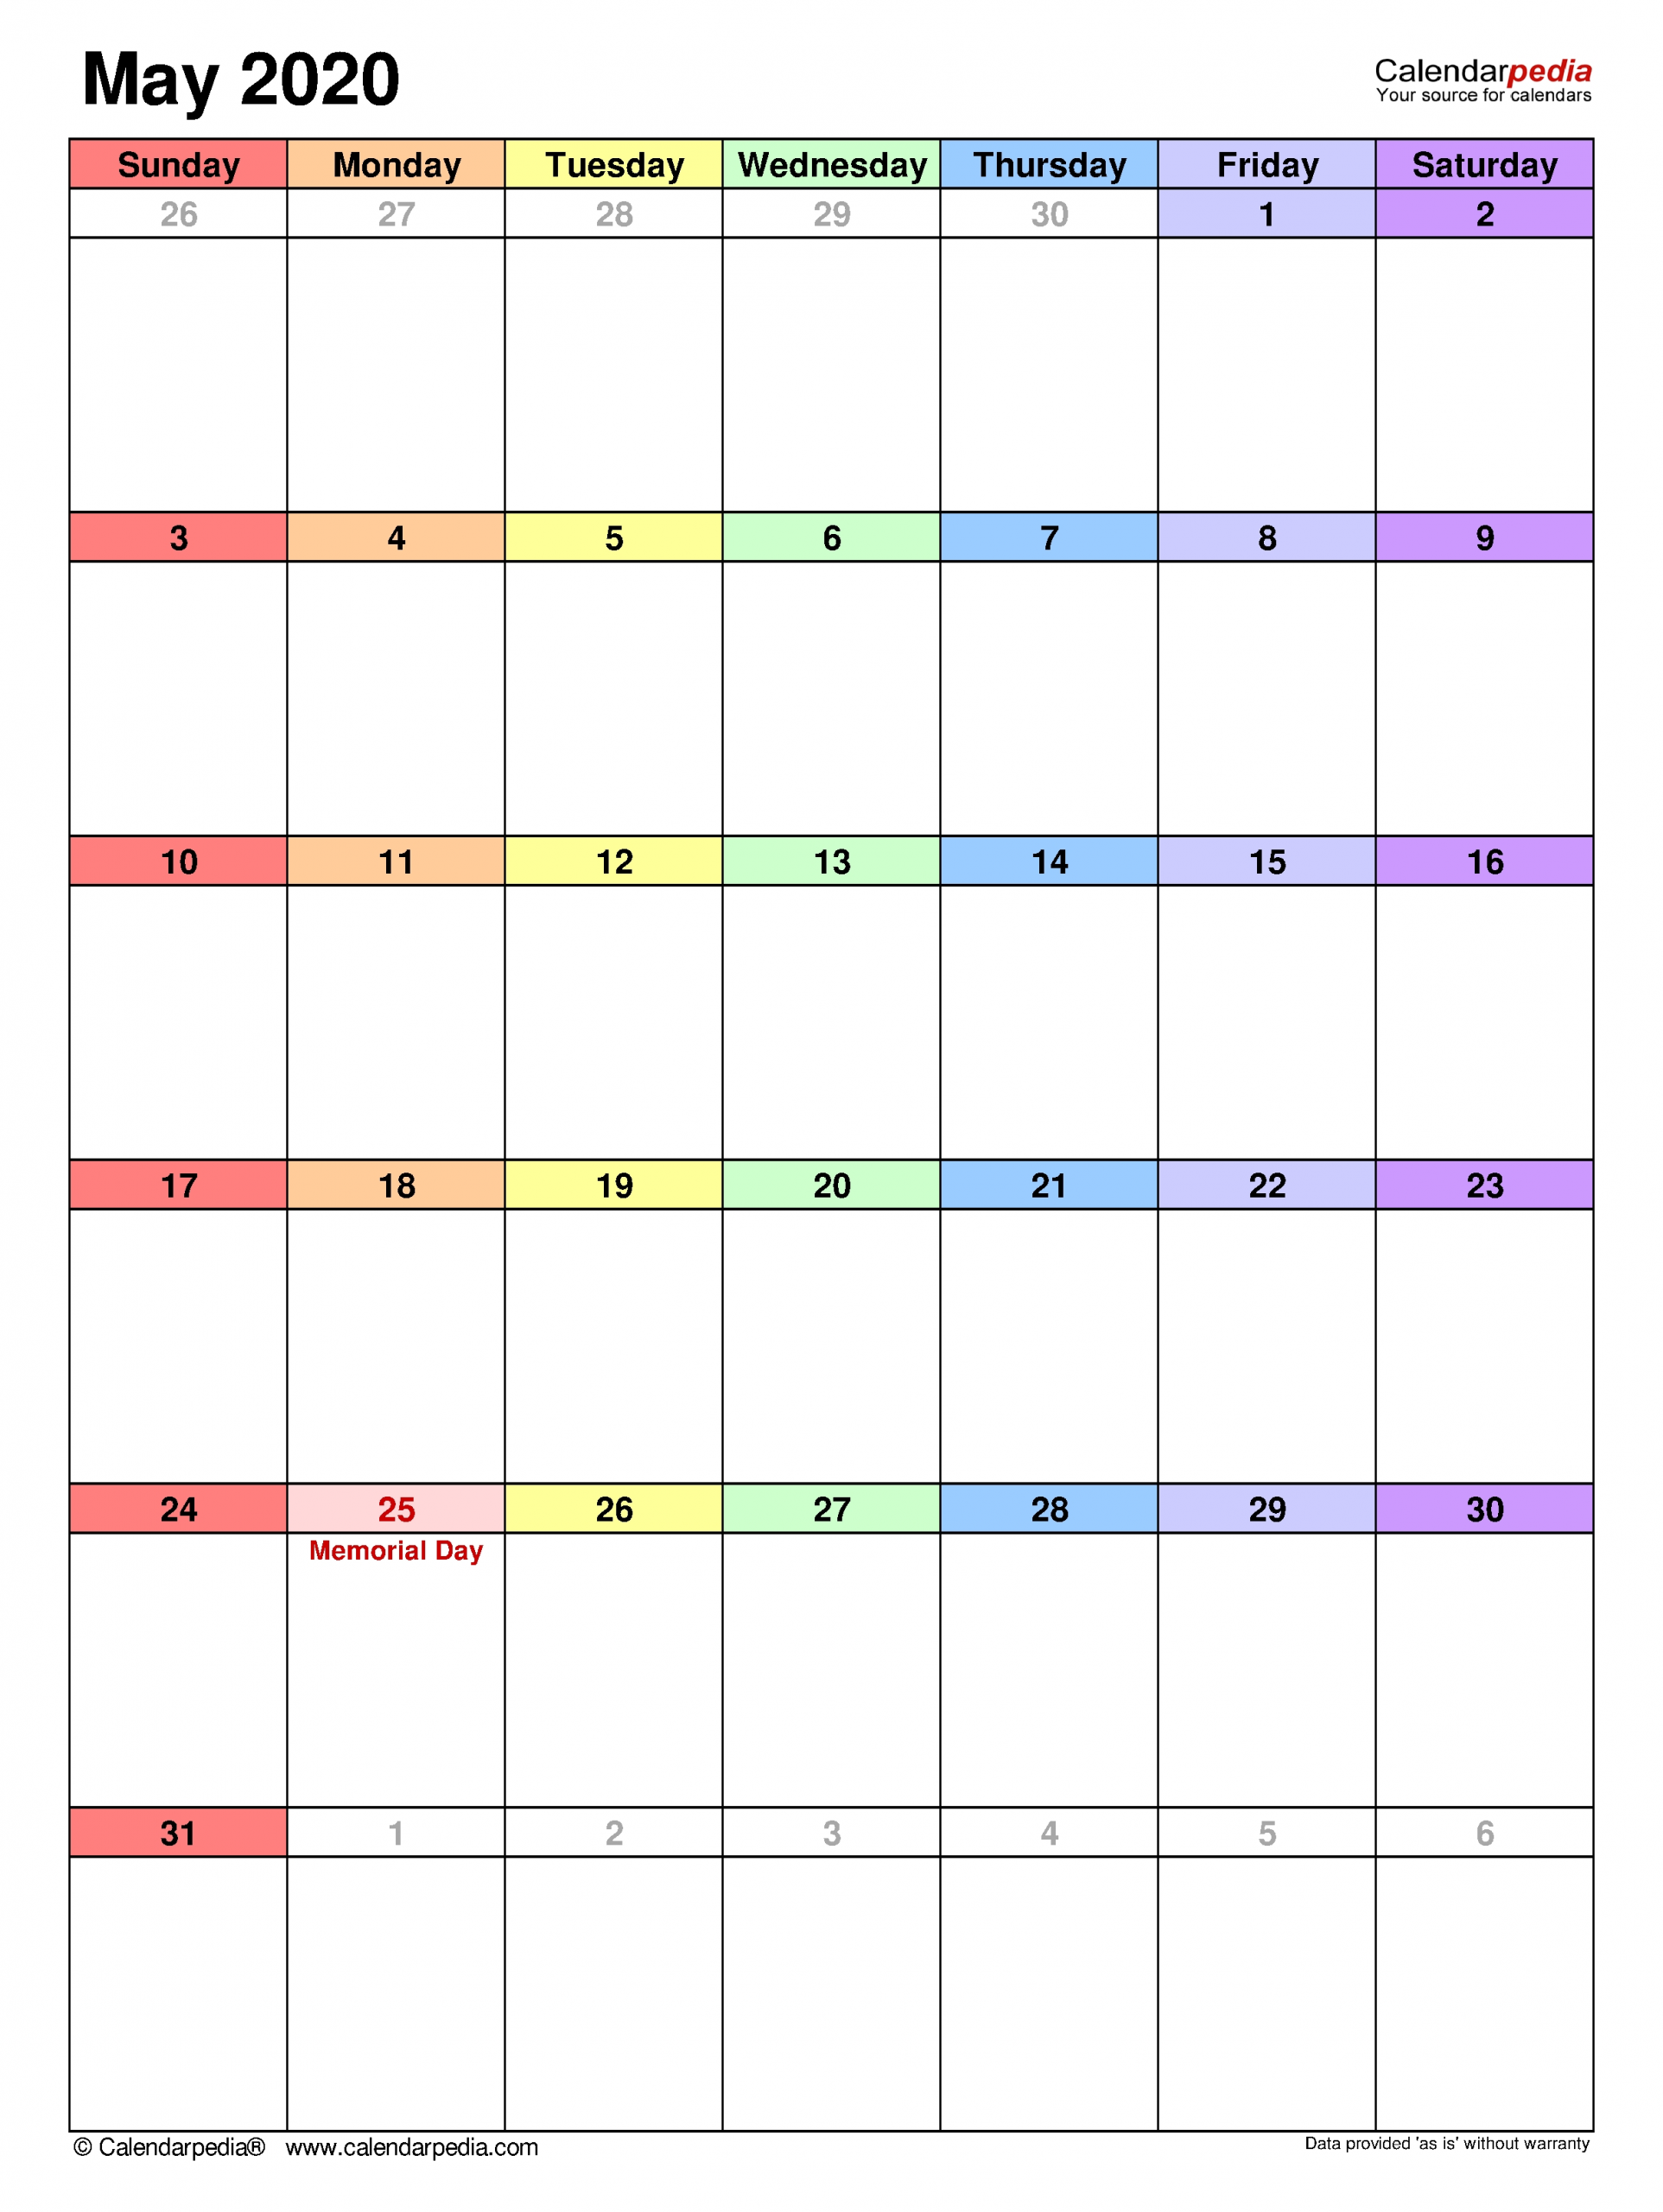 May 2020 Calendar | Templates For Word, Excel And Pdf